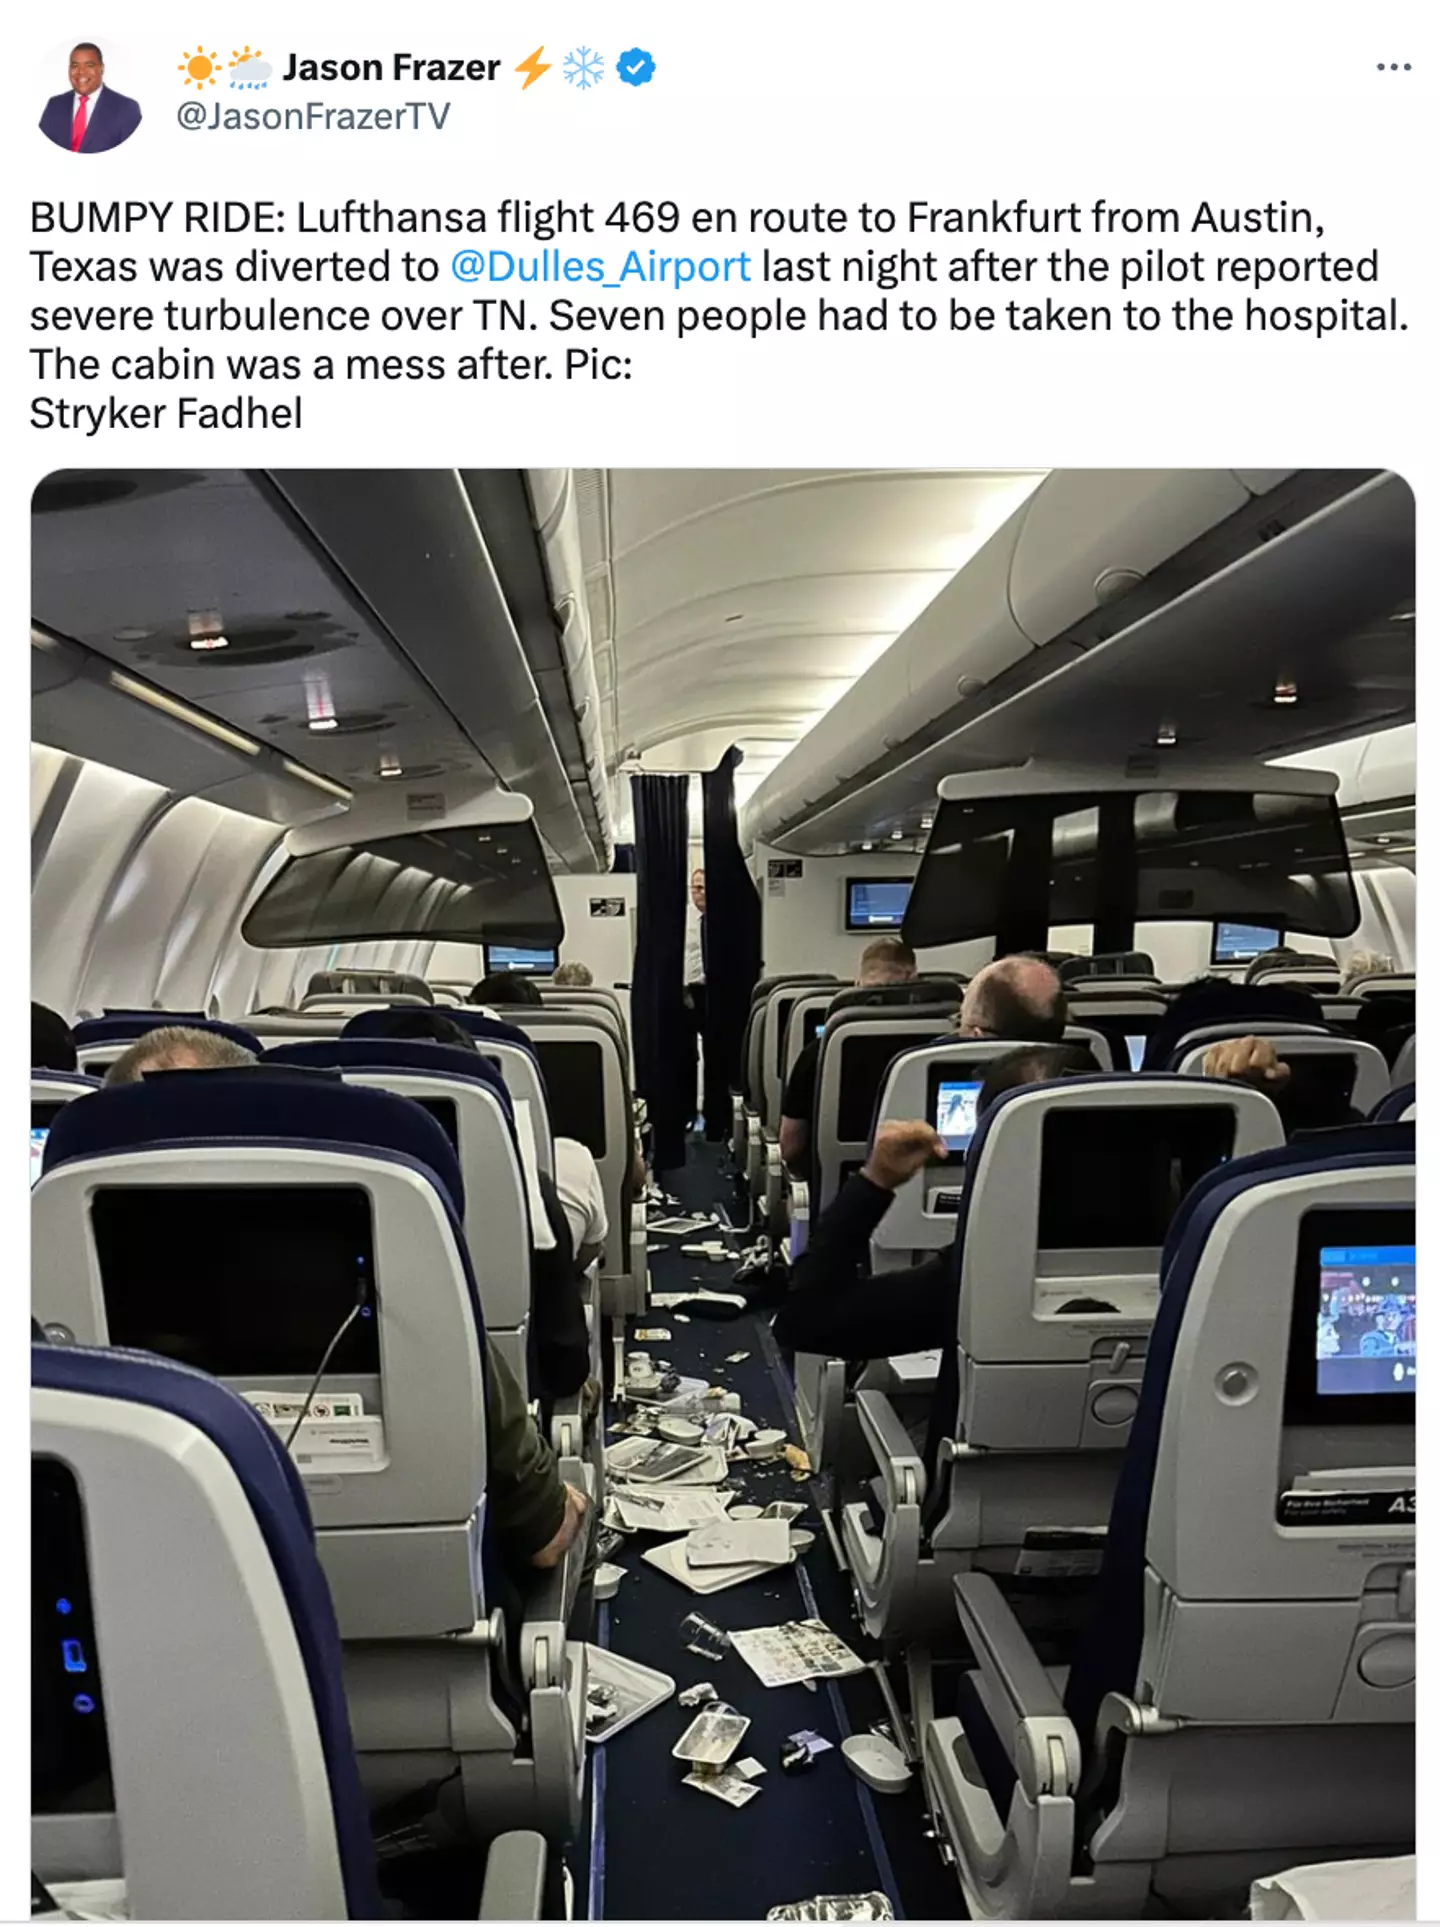 Items were left scattered across the aisle after the turbulence.